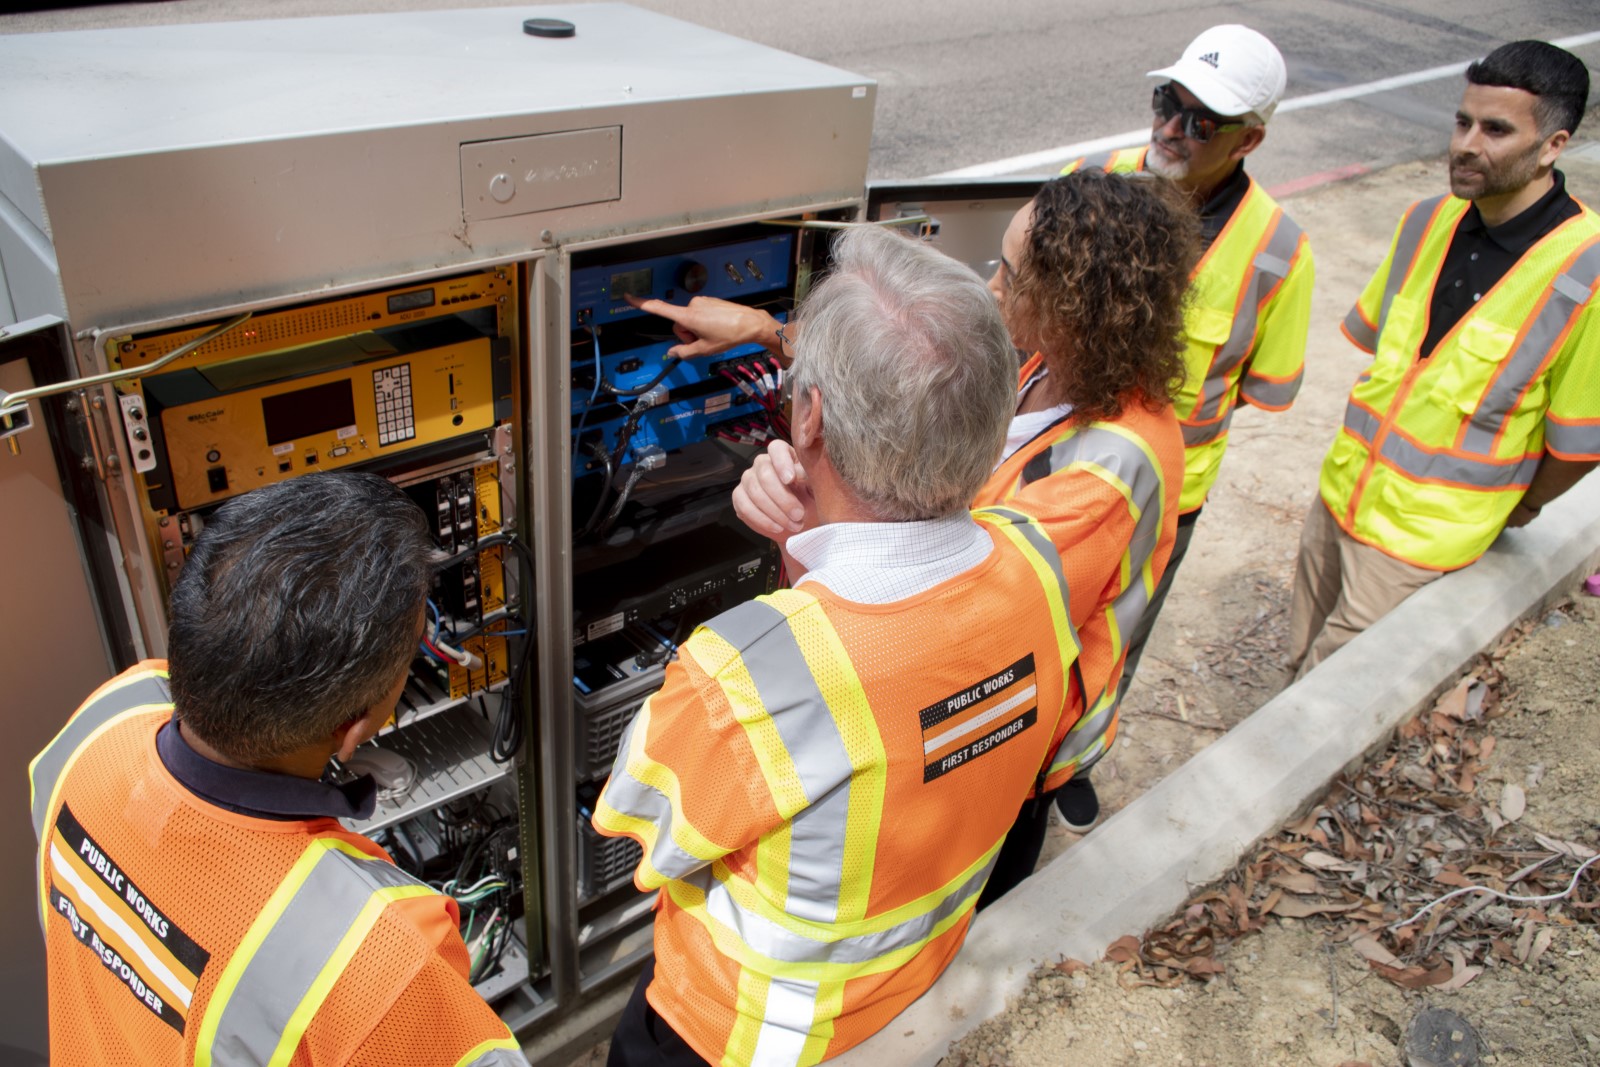 public work employees look at a new backup battery system